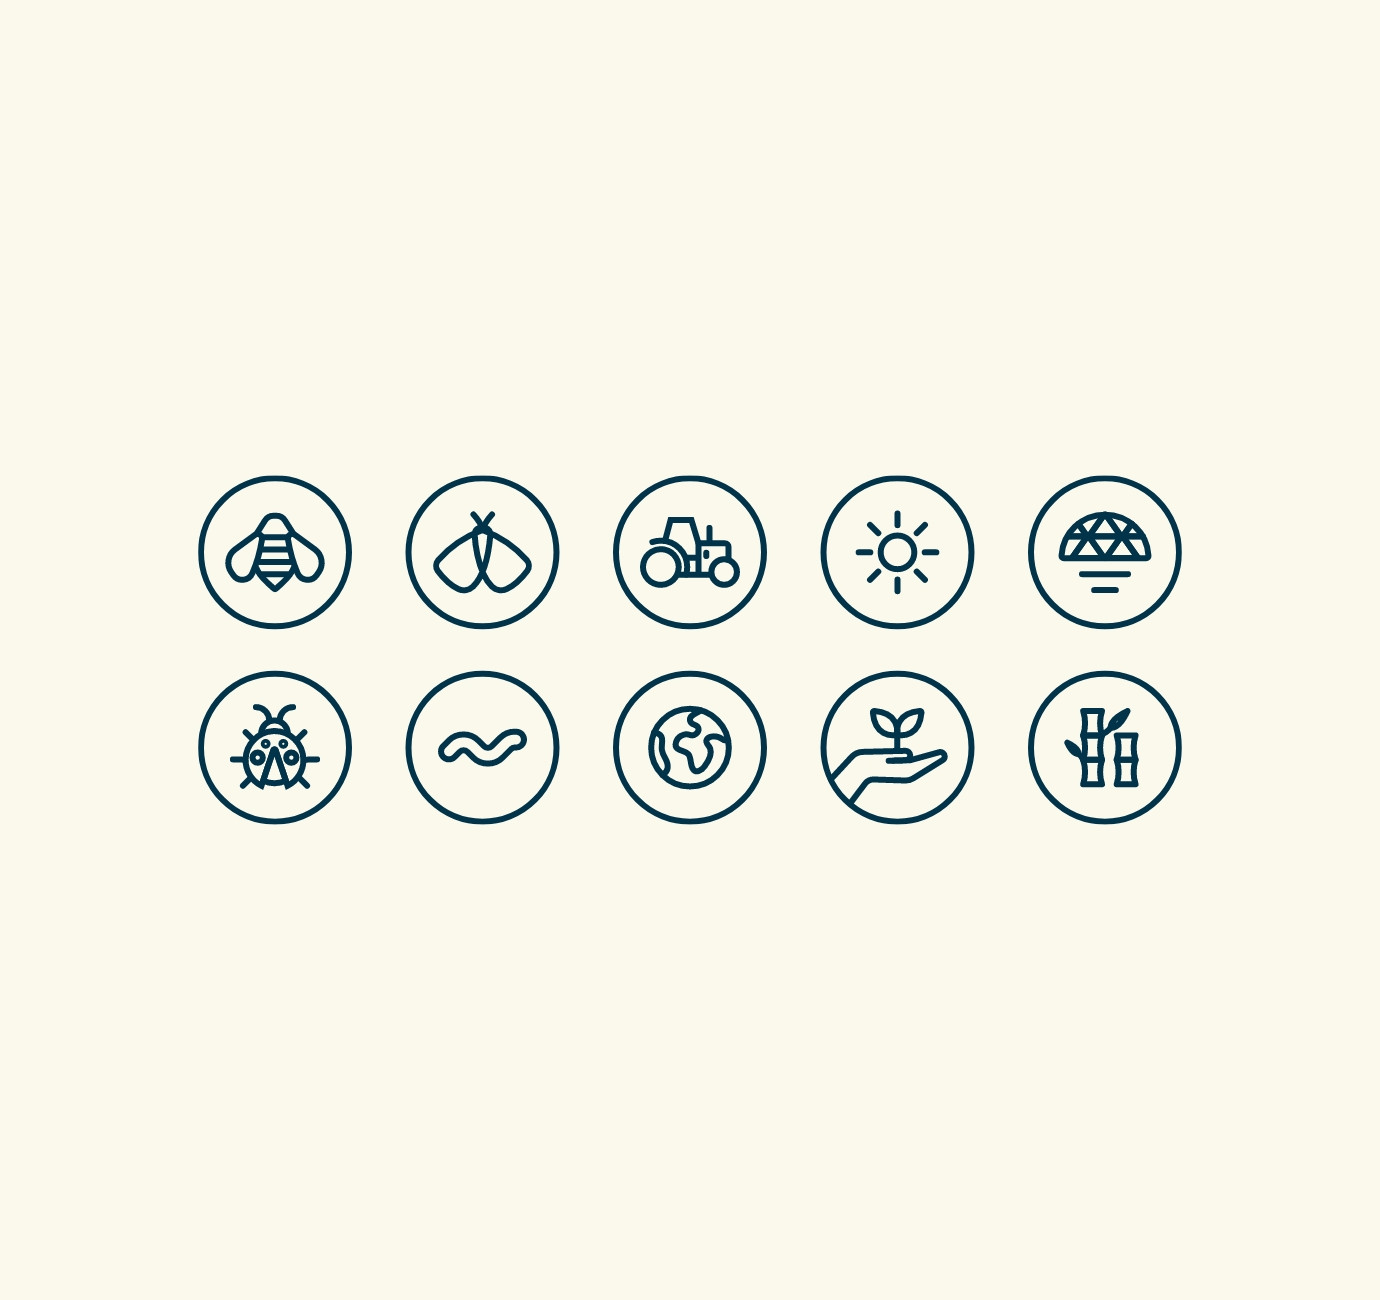 Illustrated icon set for zoo